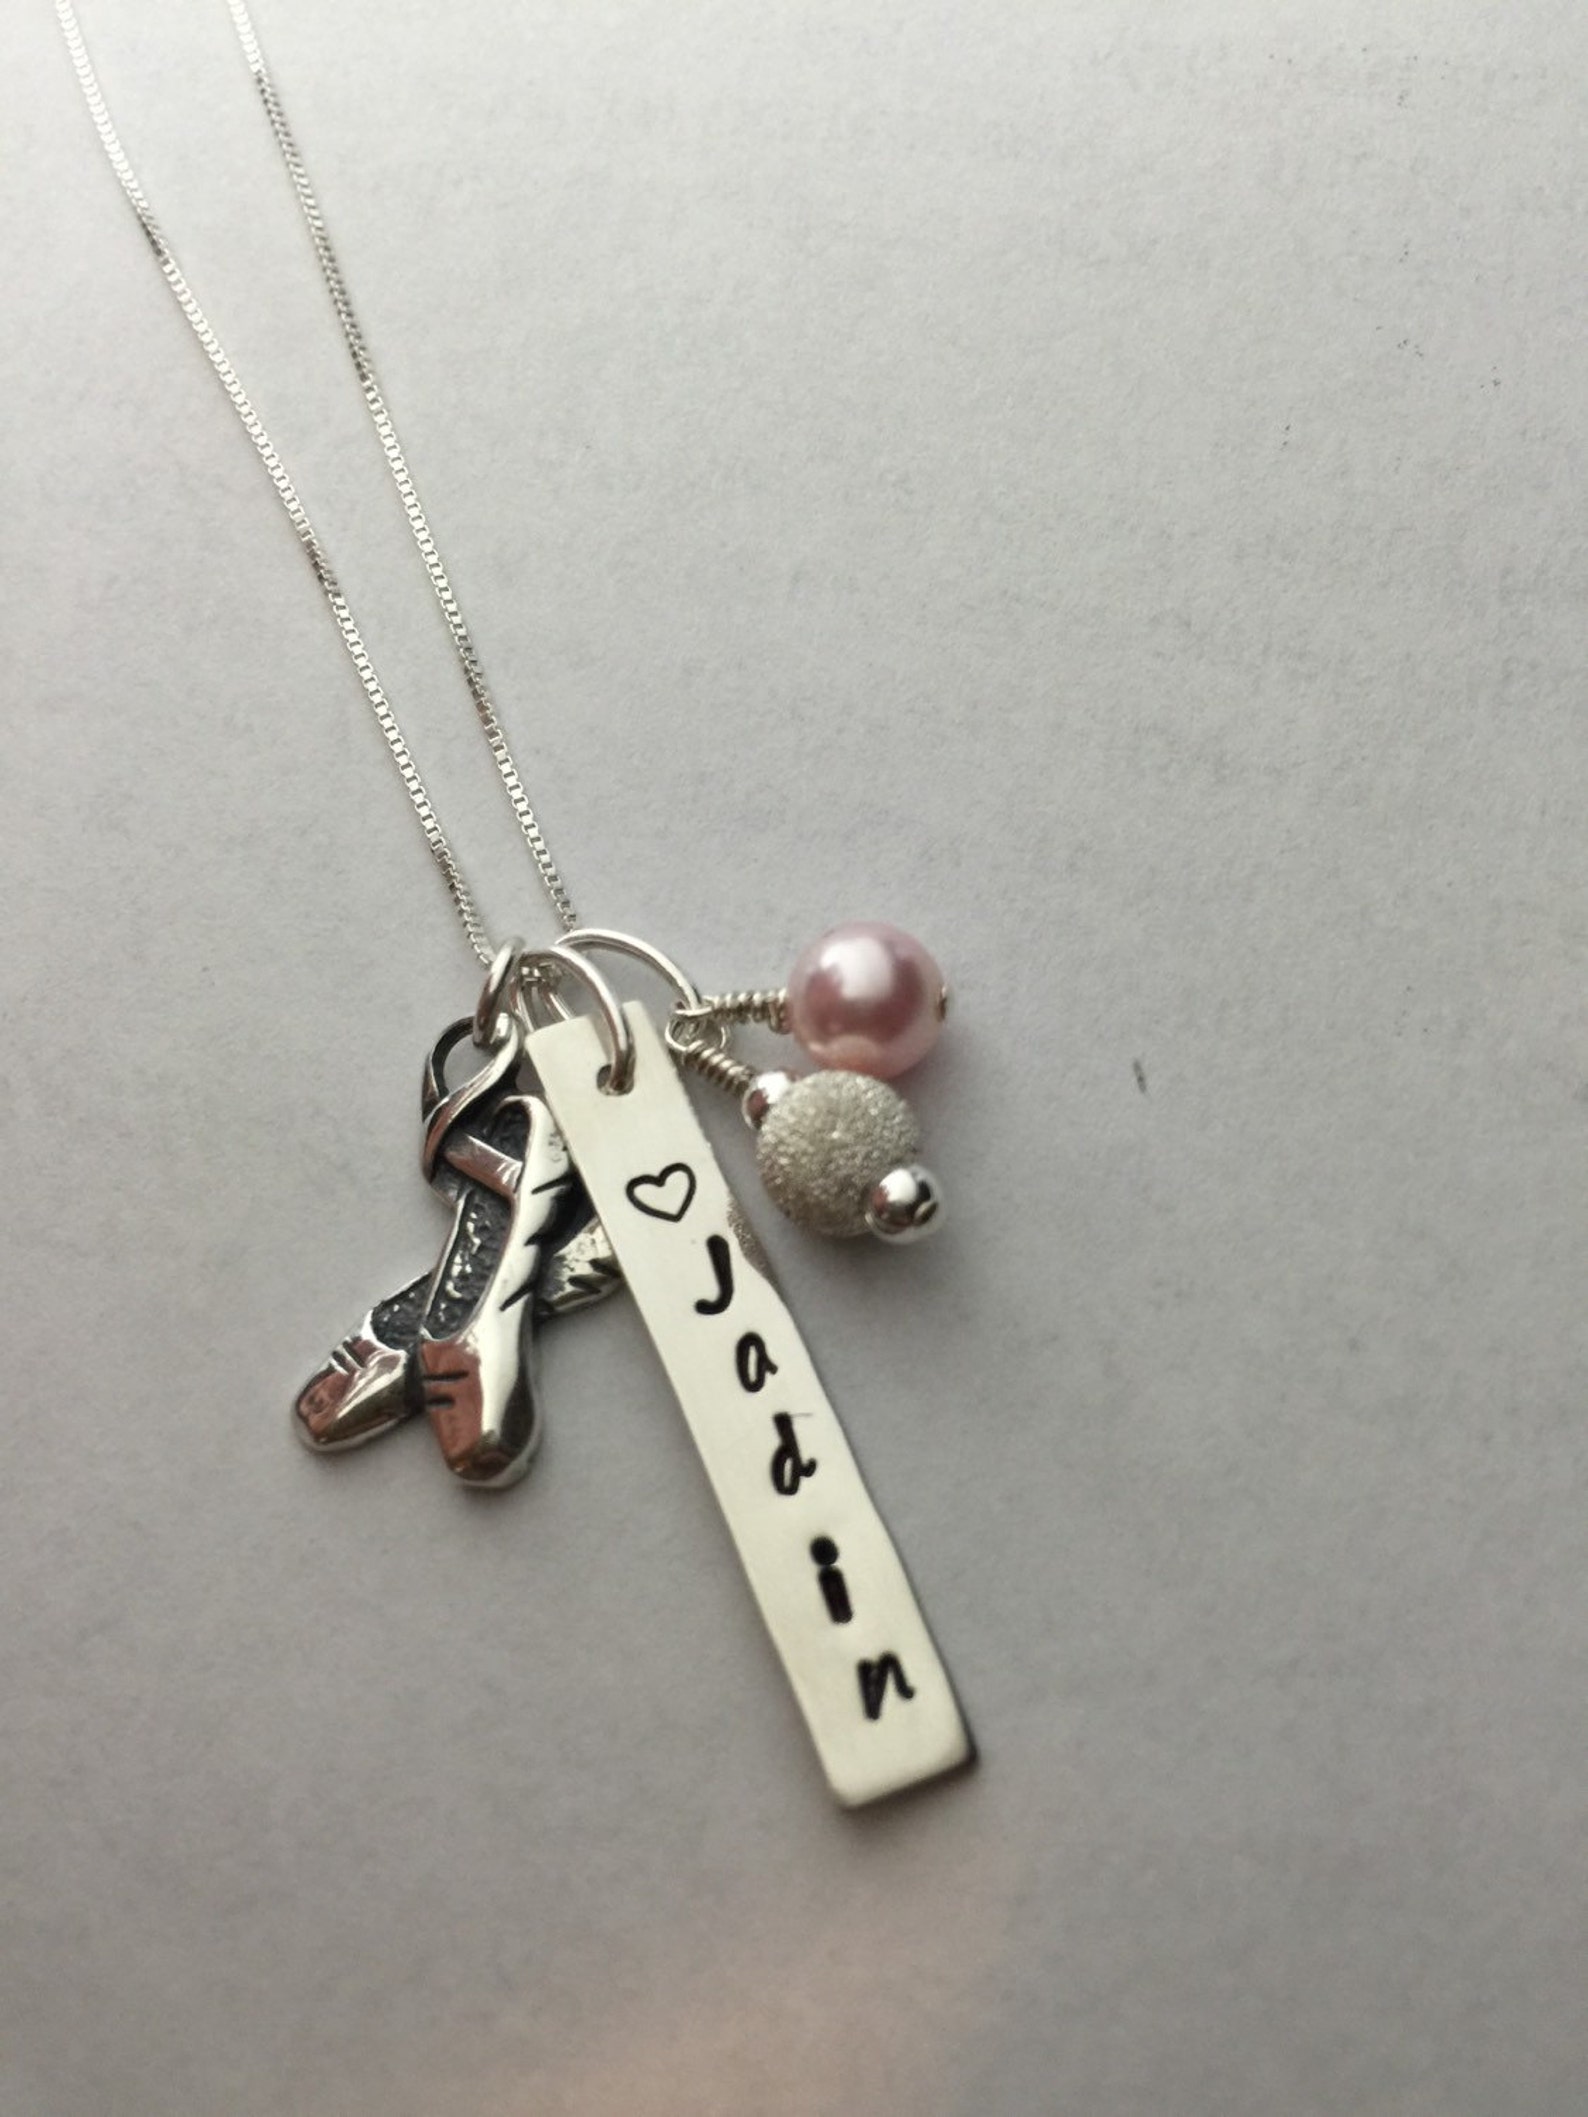 personalized sterling silver ballet shoes necklace with sterling silver bead and swarovski pearl, dancer gift, recital gift,gift